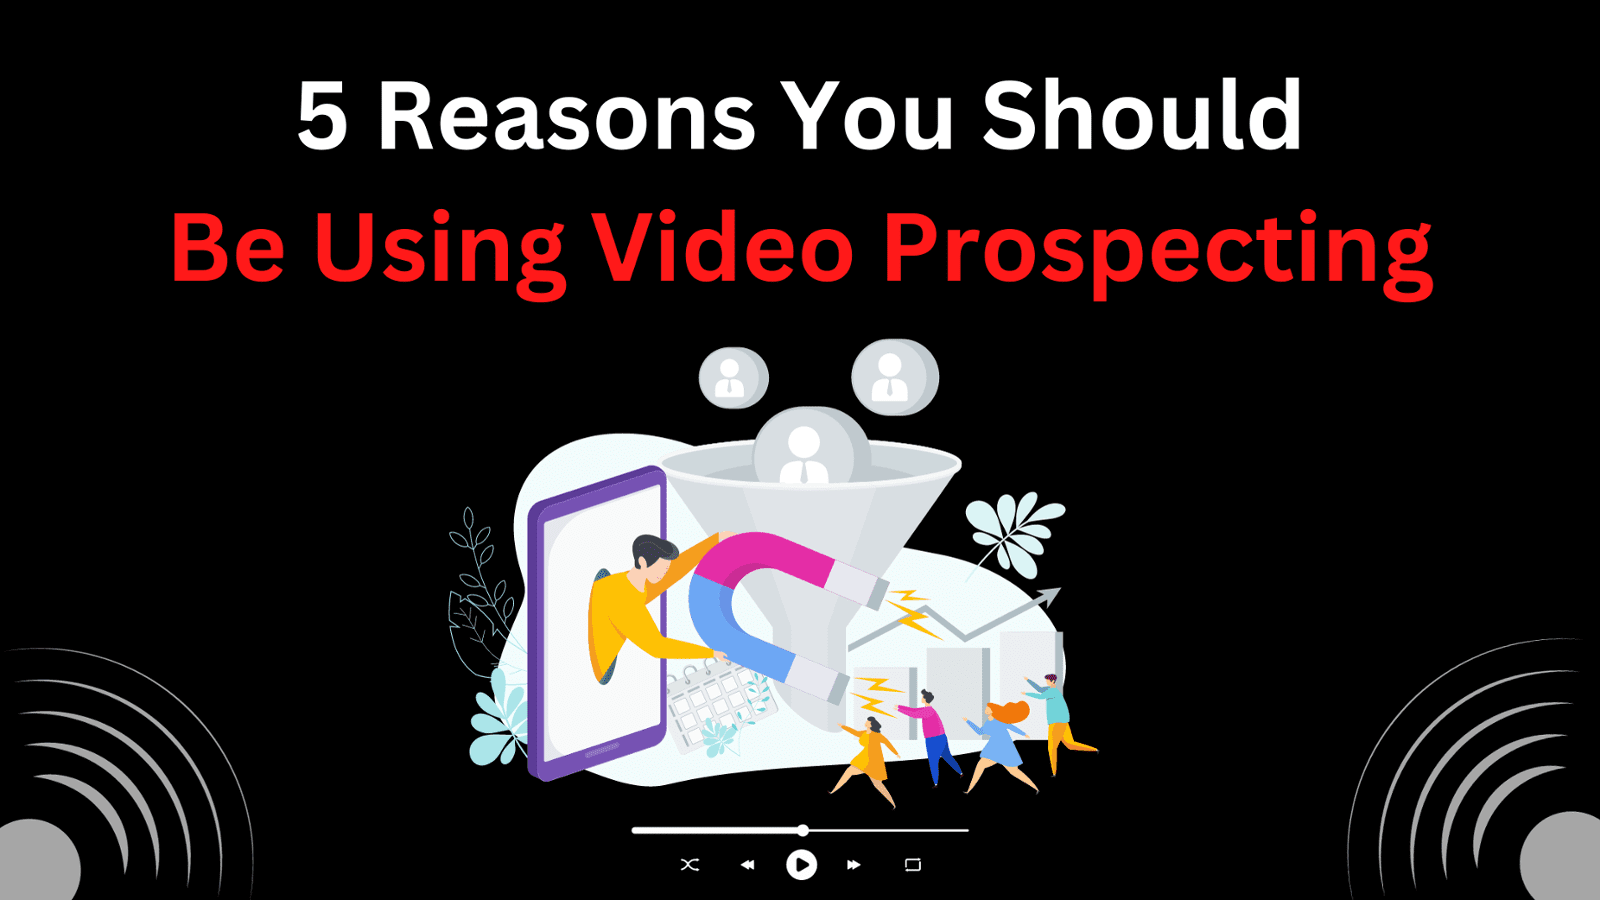 5 Reasons Why Video Prospecting is Great for your Business! 